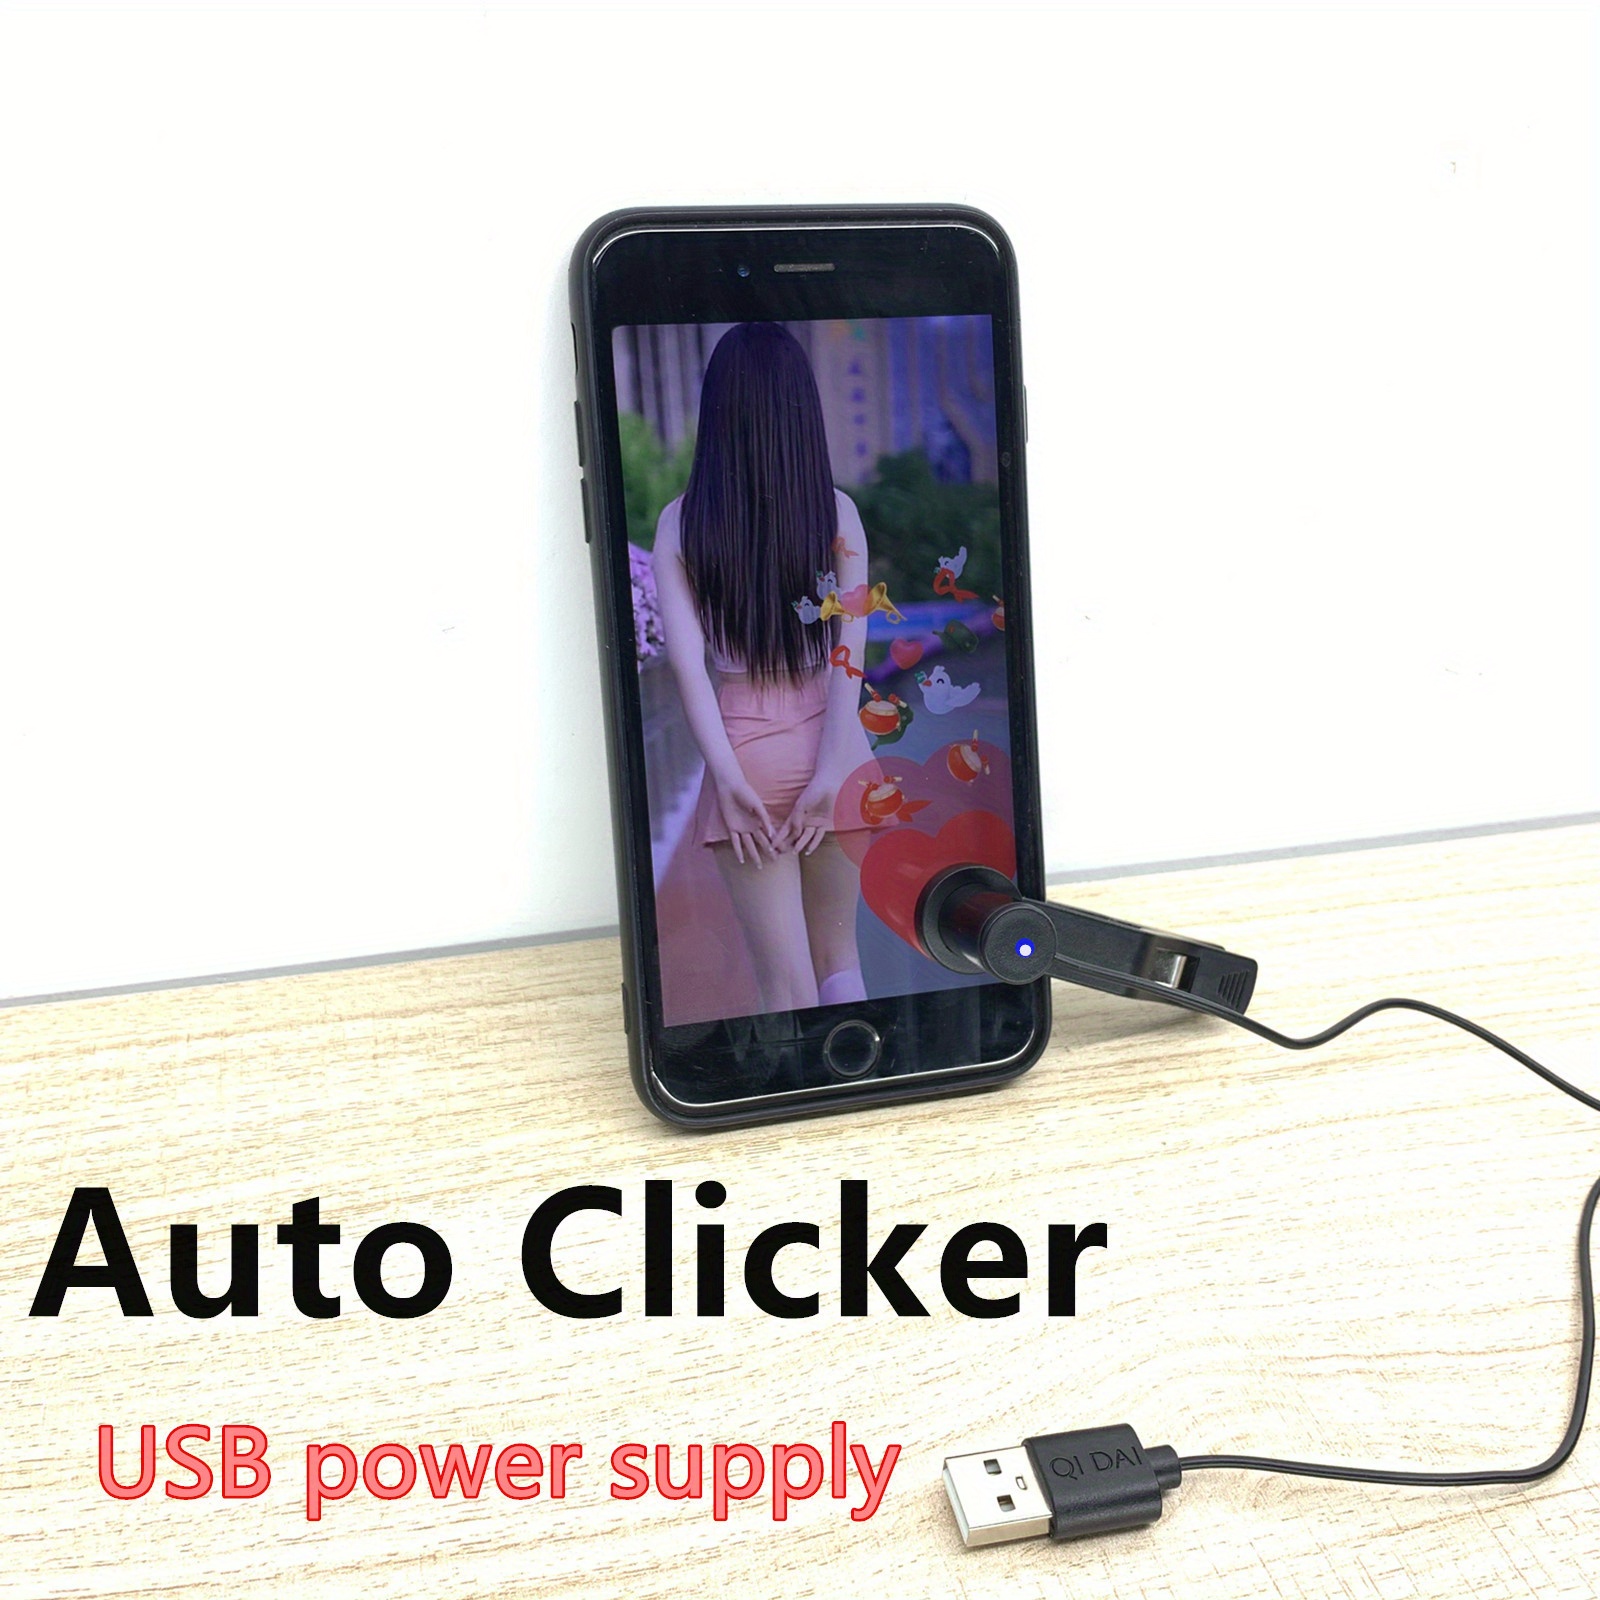 Why isn't there an automatic auto clicker for an iPhone? - Quora